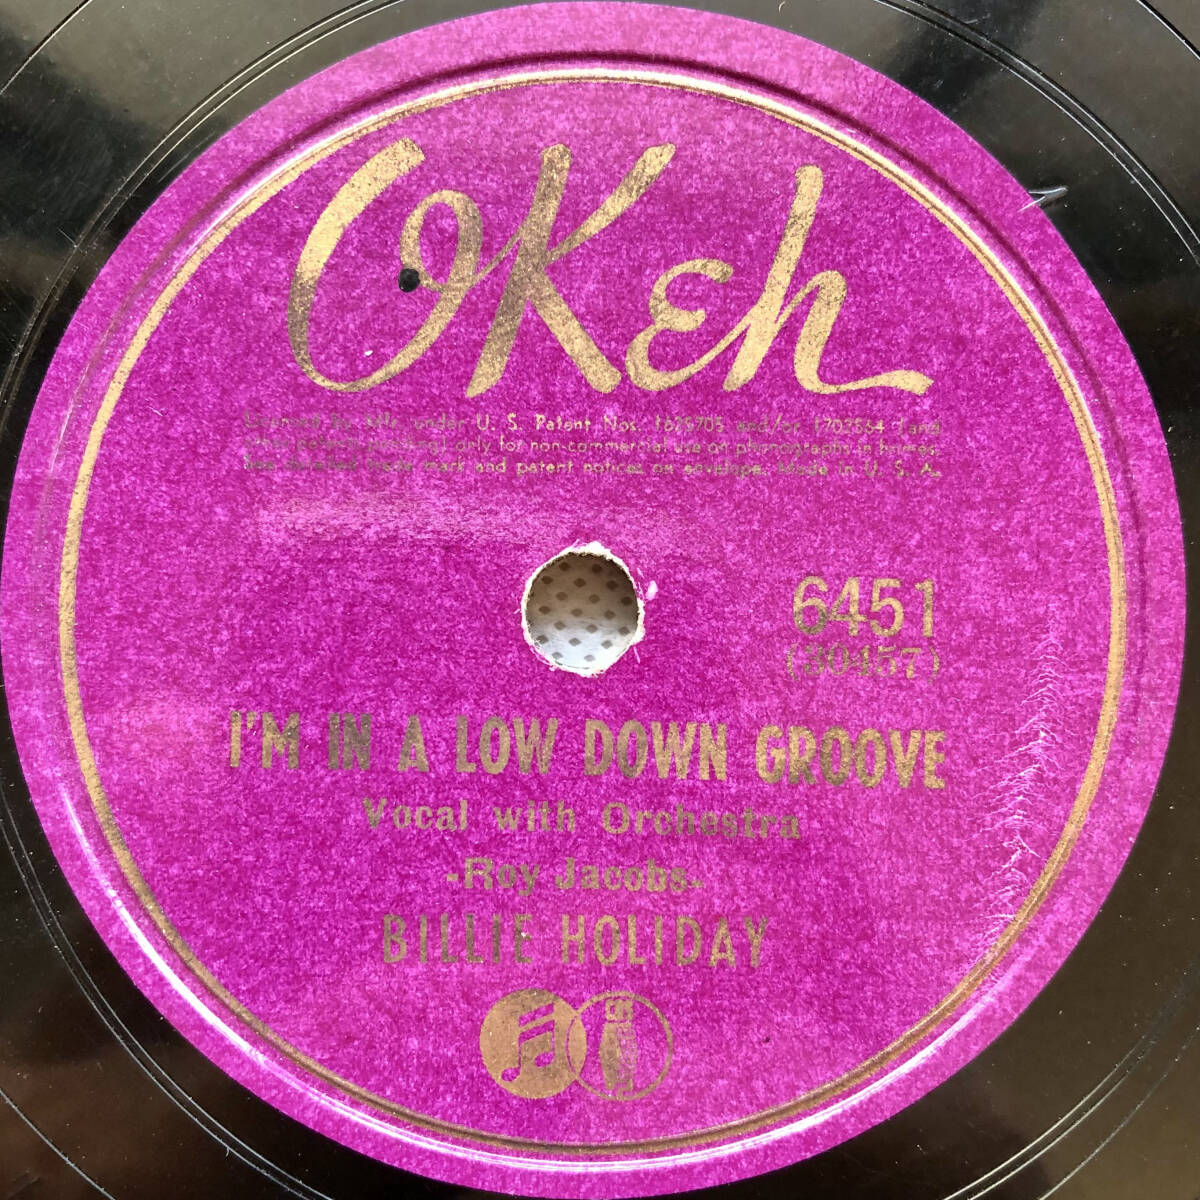 Billie Holiday / Okeh 78rpm / I'm In A Low Down Groove, Gloomy Sunday / ビリー・ホリディの画像3